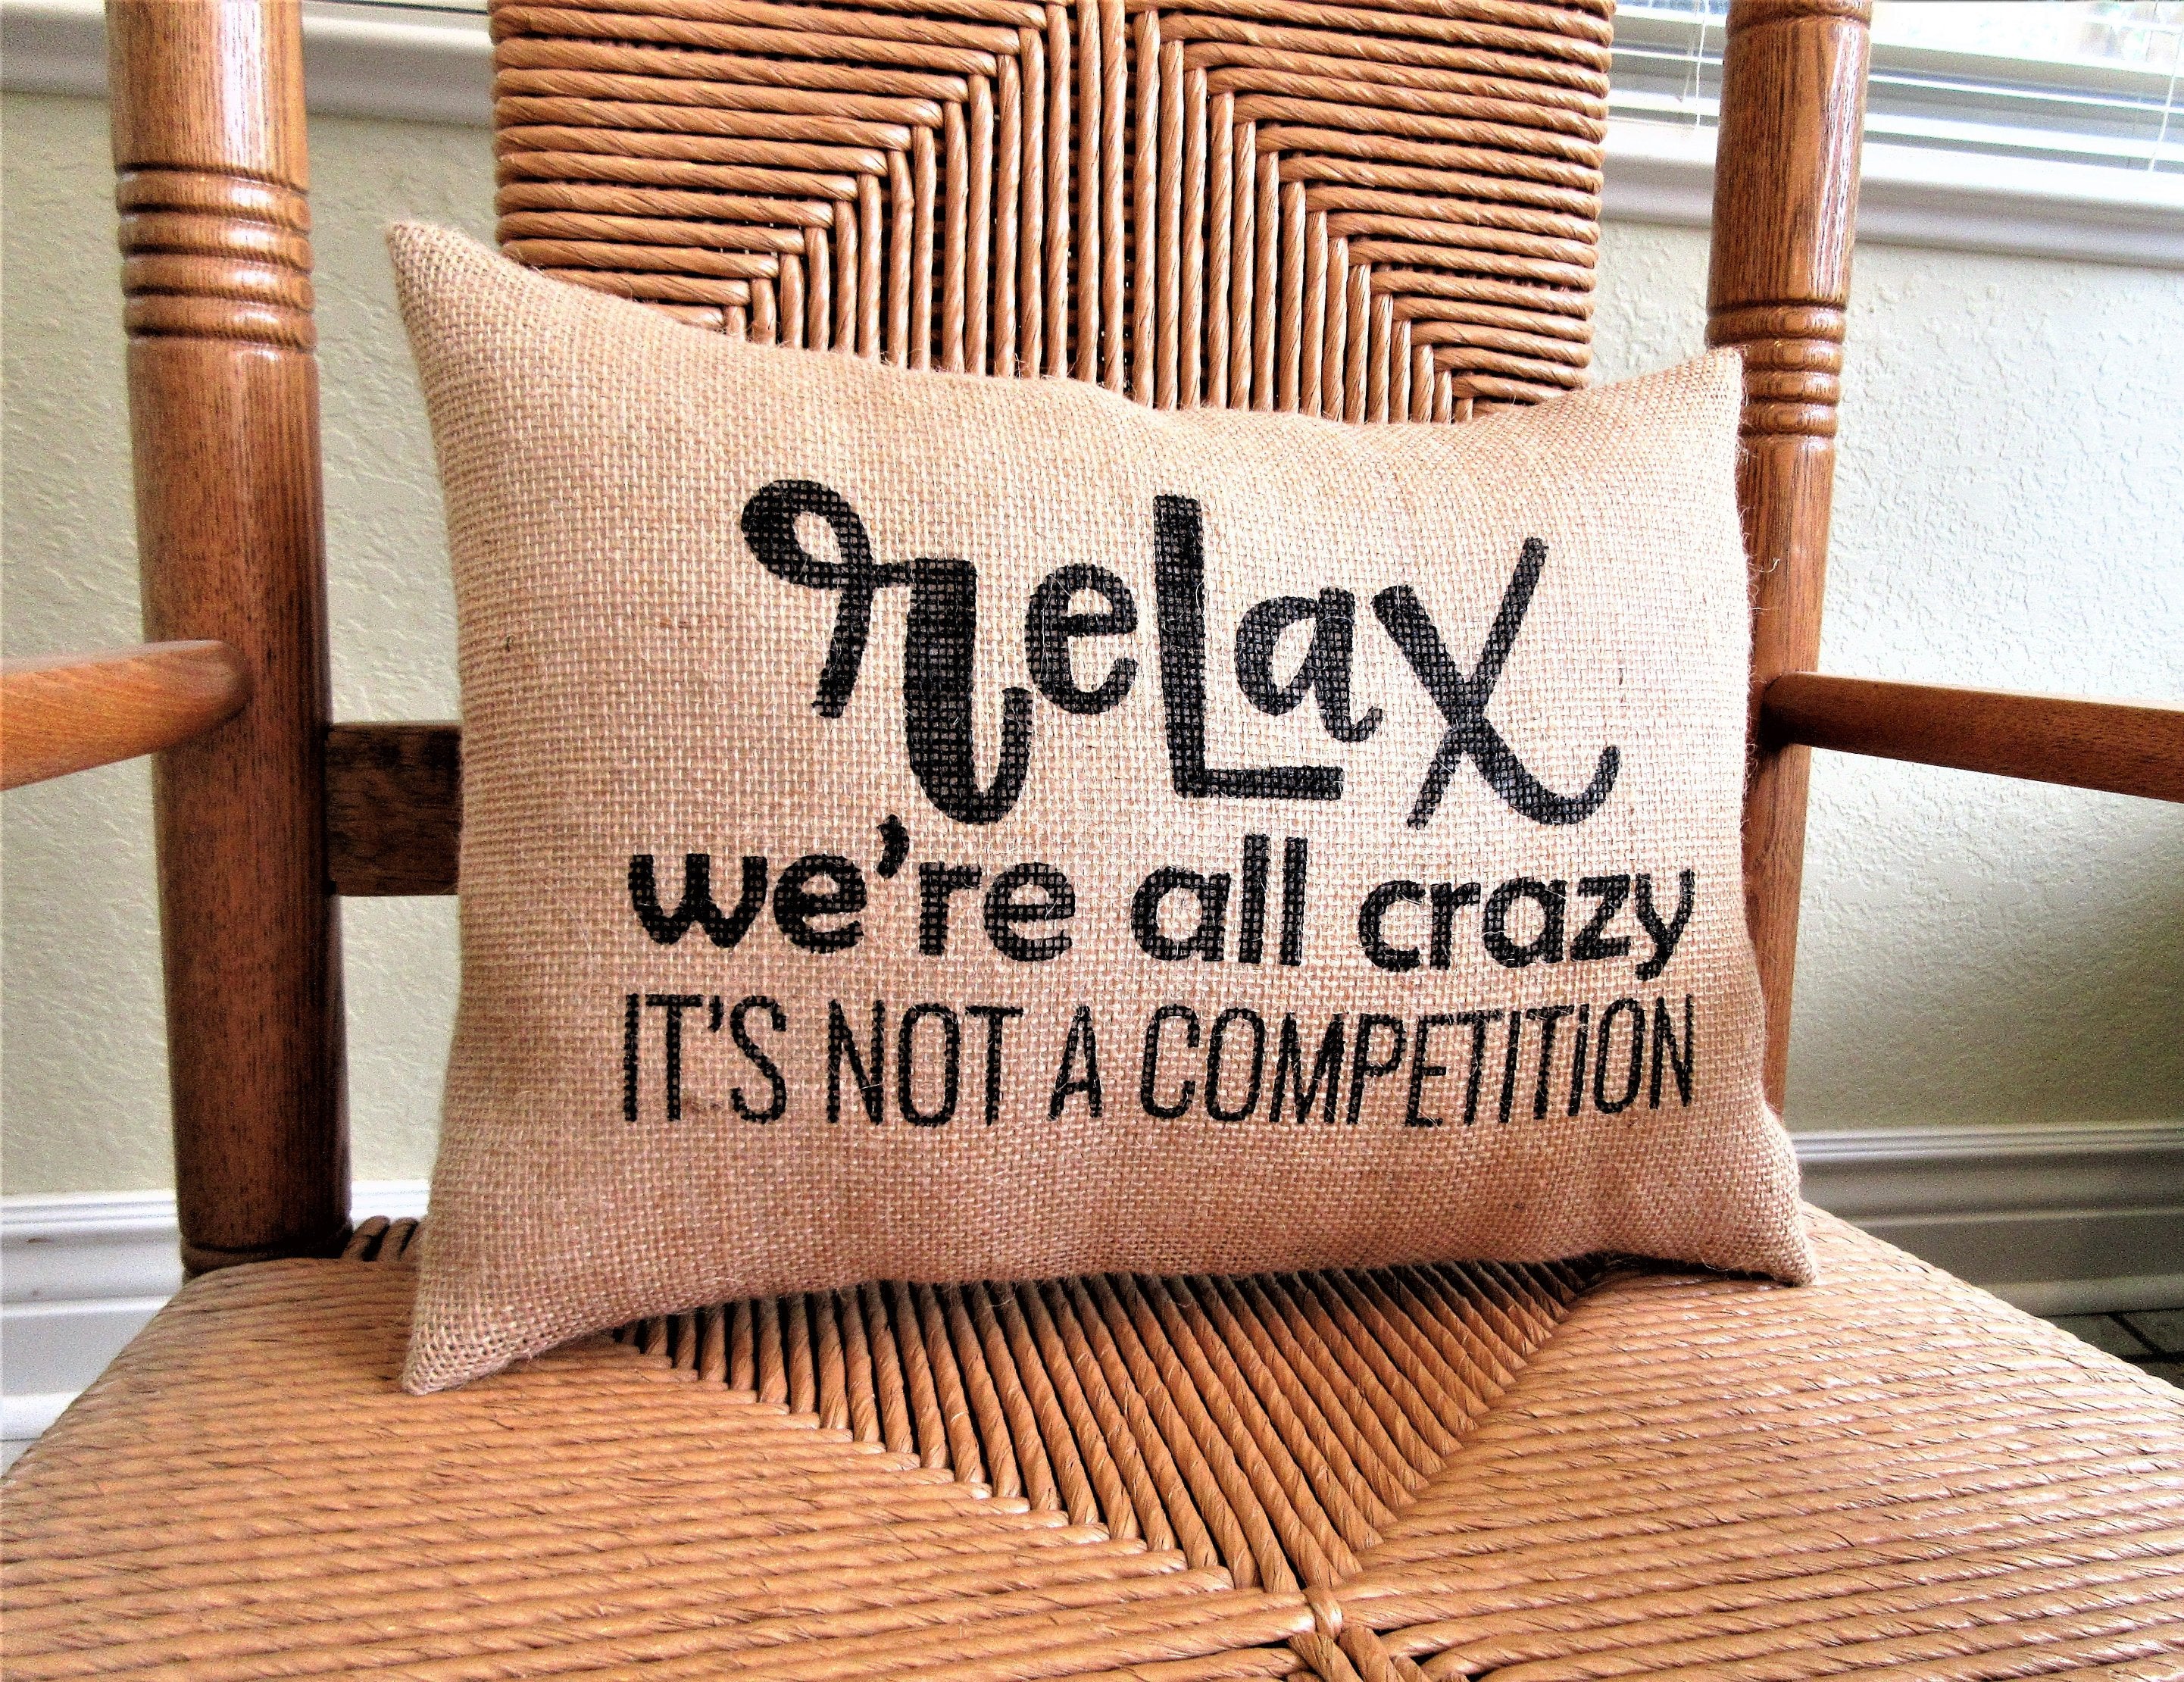 Relax We're All Crazy Burlap Pillow